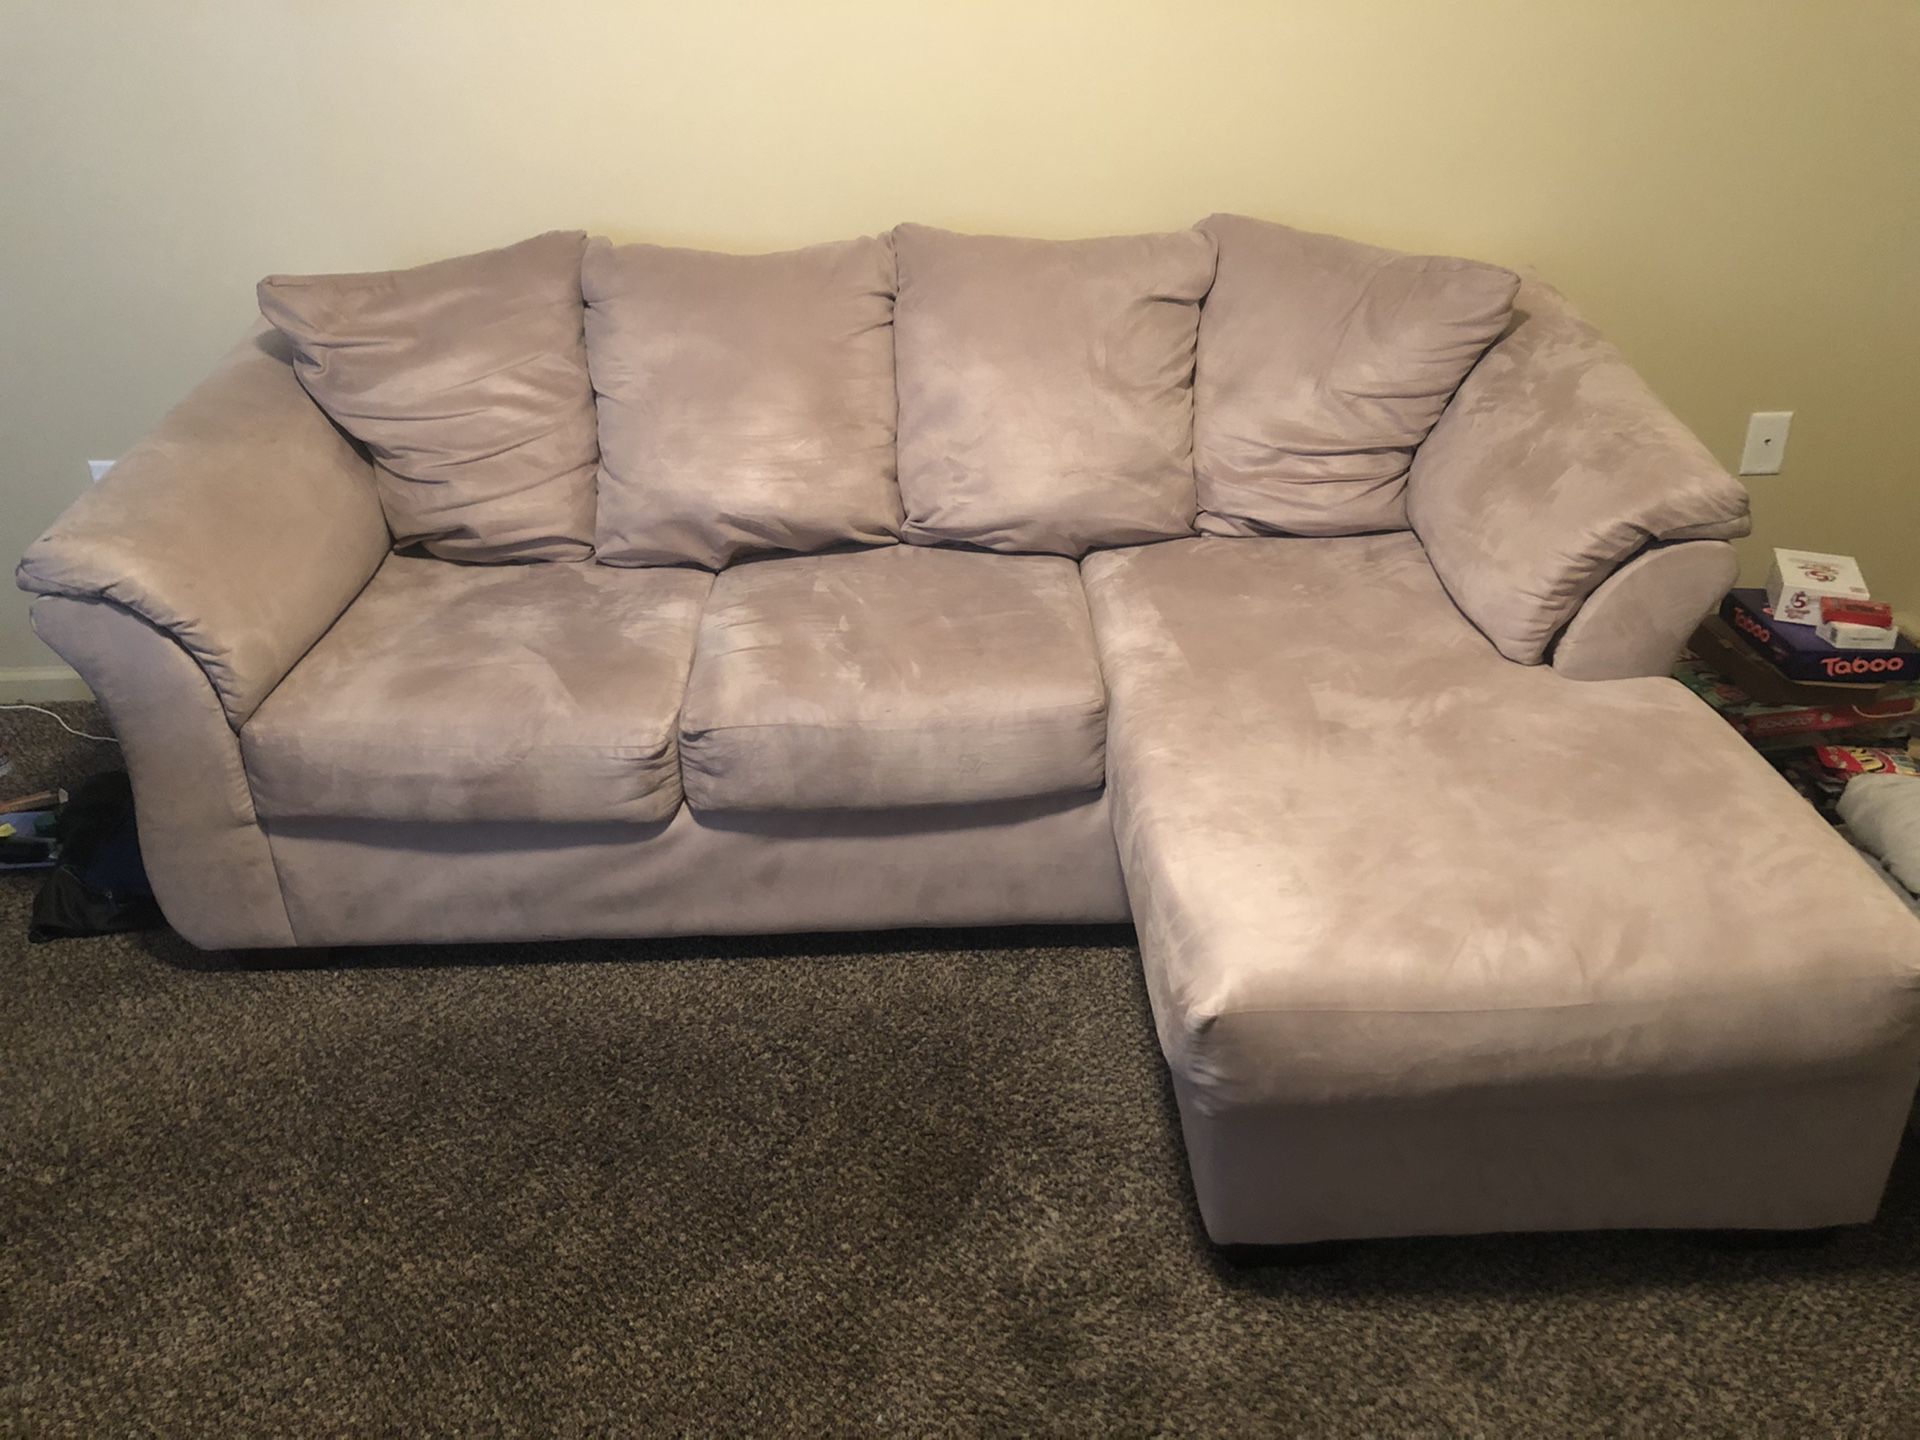 Tan suede couch